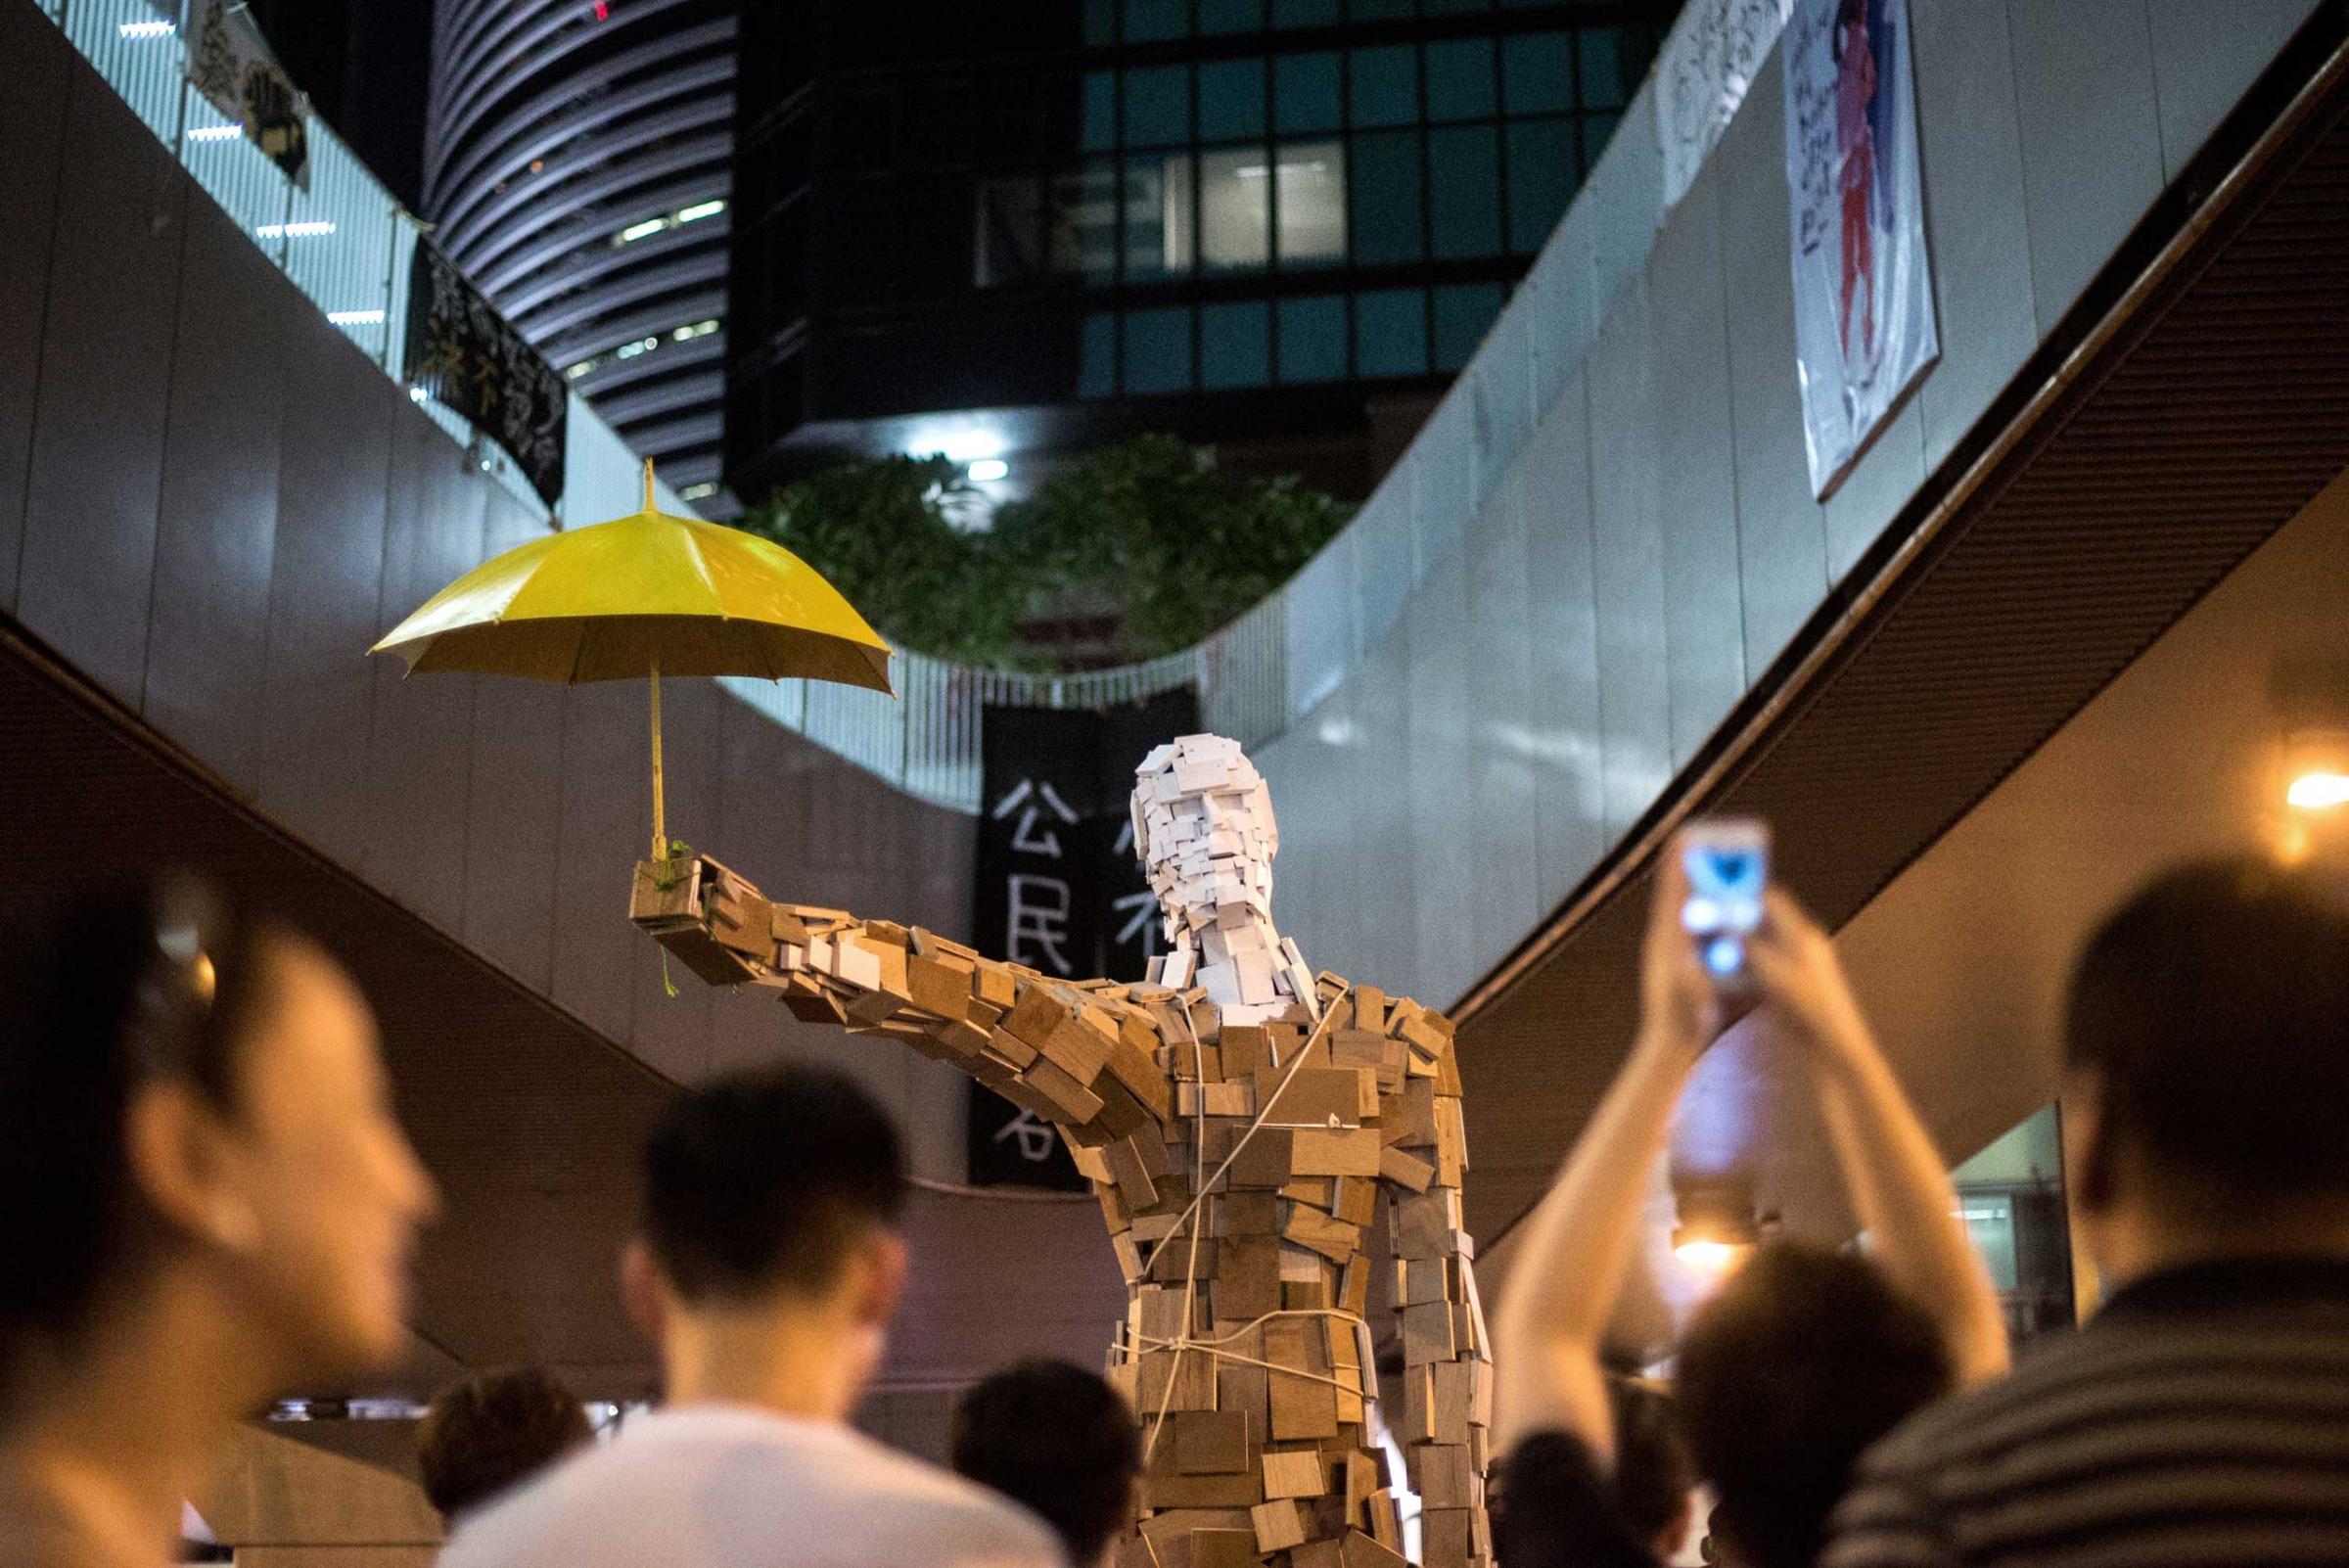 The statue "Umbrella Man" by the Hong Kong artist known as Milk, is set up at a pro-democracy protest site next to the central government offices in Hong Kong on Oct. 5, 2014.